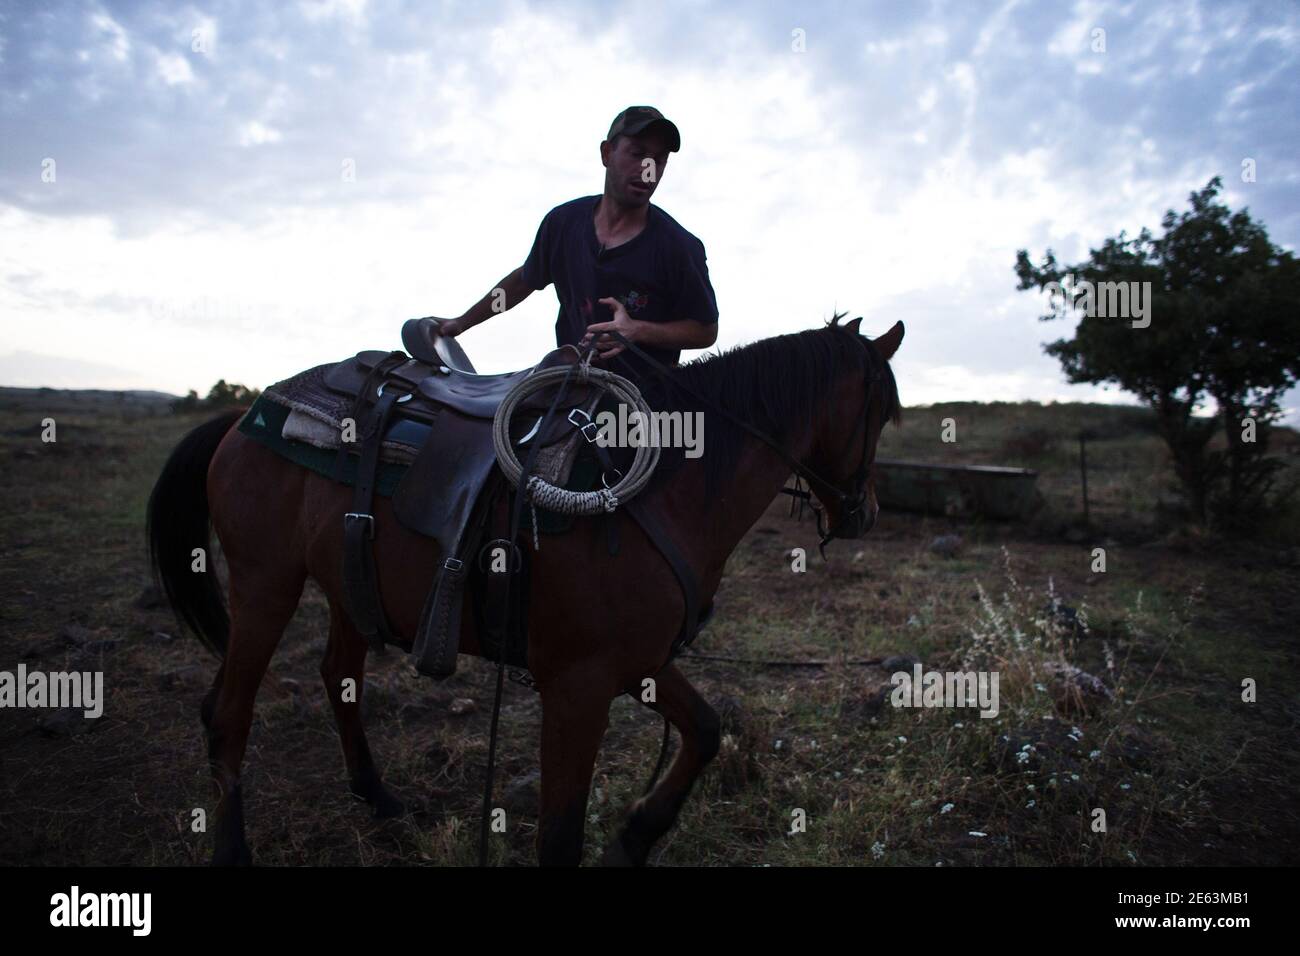 Yakir, an Israeli cowboy, steps onto his horse on a ranch just outside  Moshav Yonatan, a collective farming community some two kilometres south of  the ceasefire line between Israel and Syria in